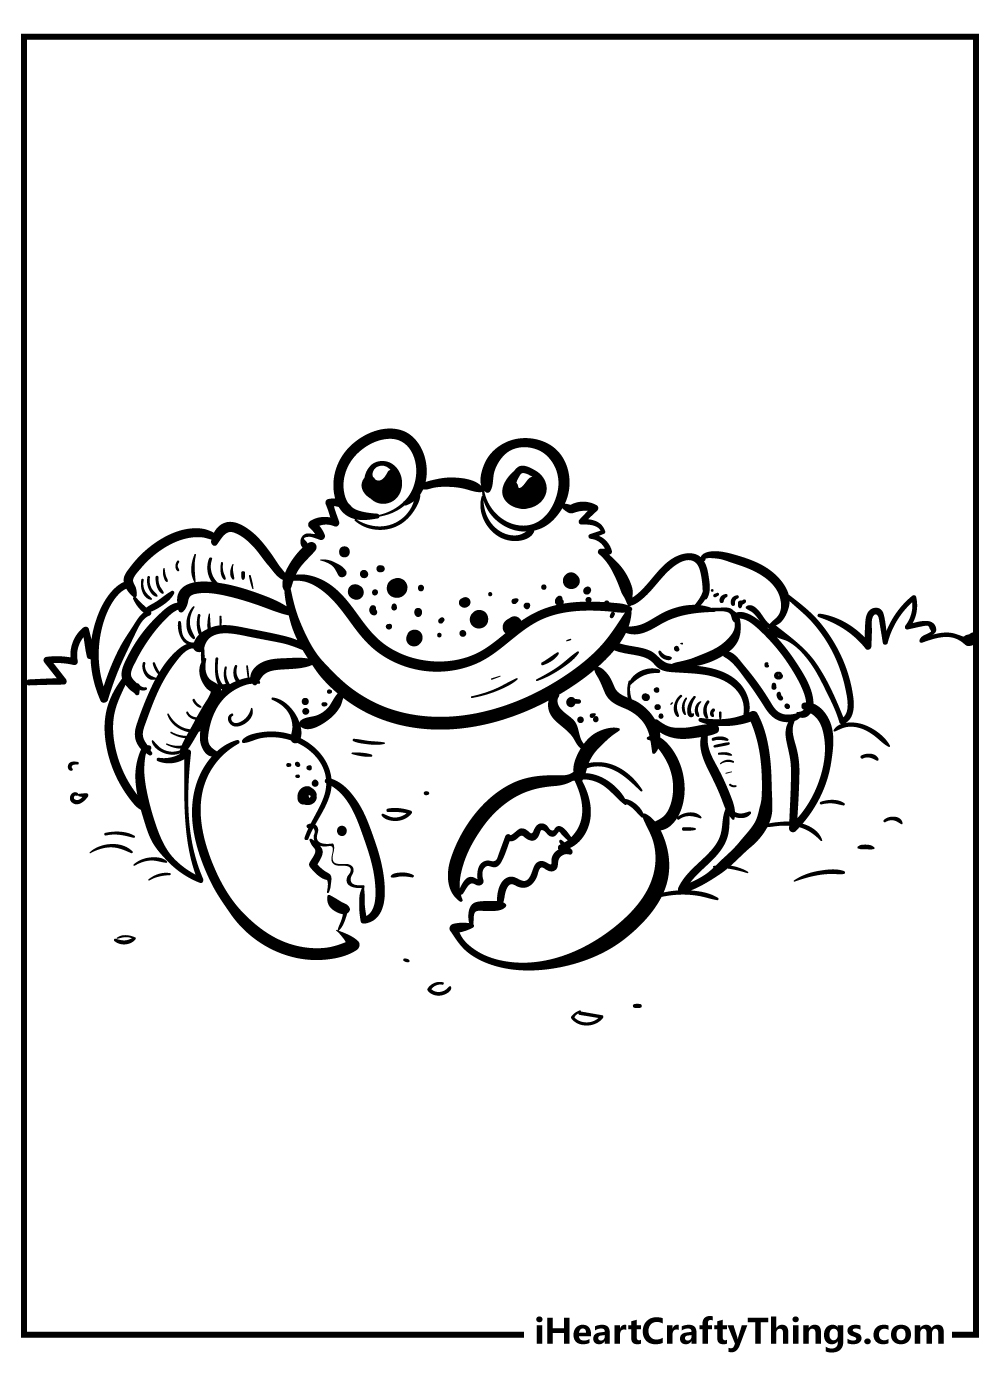 Crab Coloring Book for adults free download